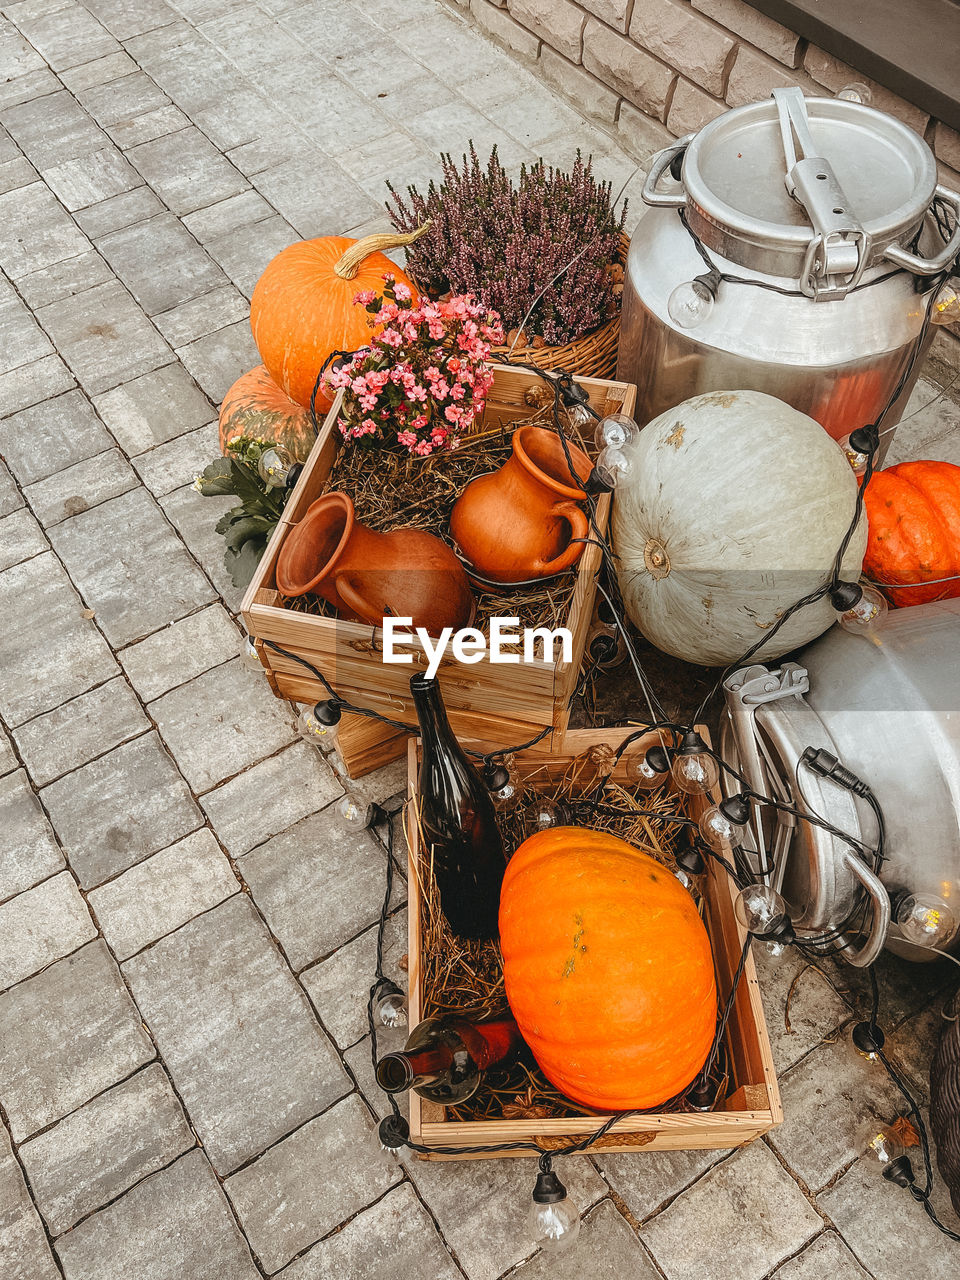 Pumpkin, clay jugs lie with straw in wooden boxes, next to iron cans, and a basket of lavender